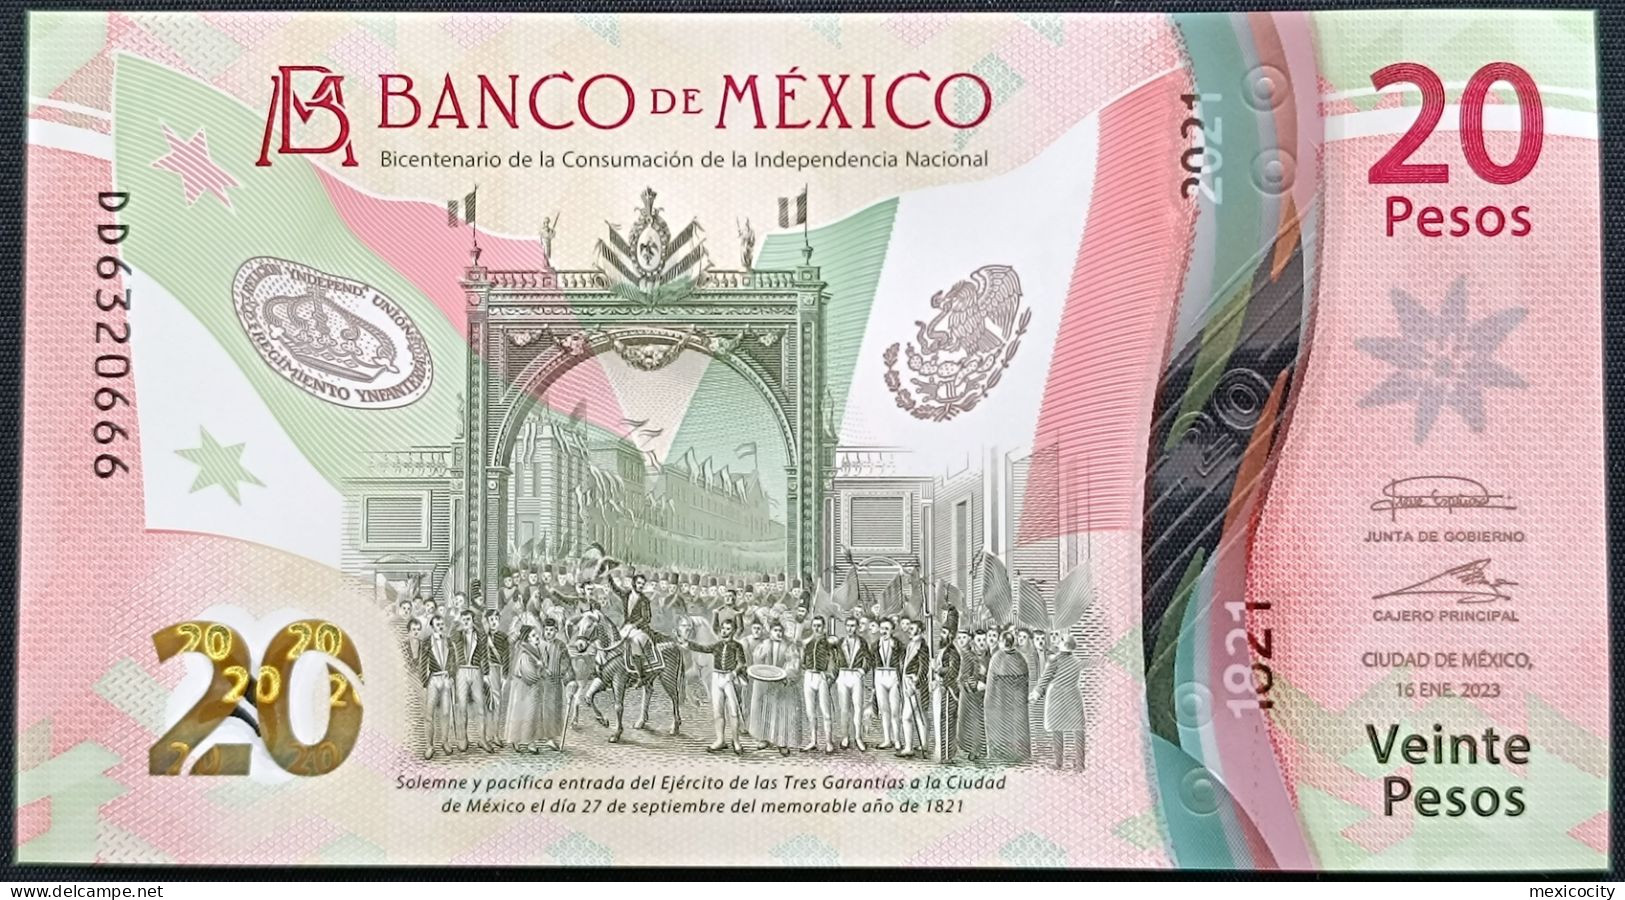 MEXICO $20 SERIES DD6320666 ANGEL # - 16-JAN-2023 INDEPENDENCE POLYMER NOTE BU Mint Crisp - Mexico